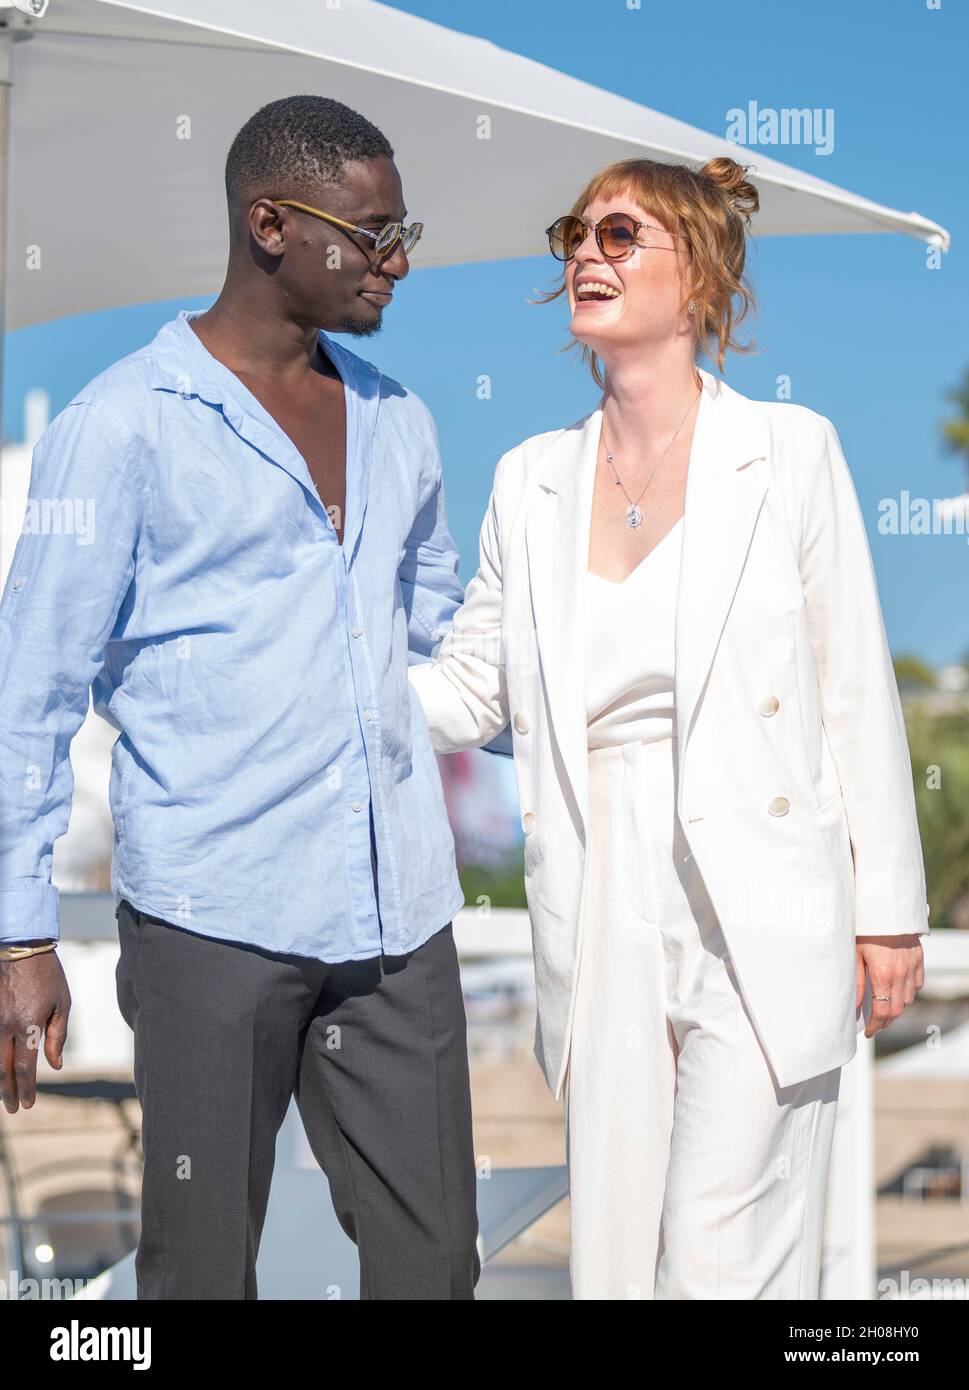 Cannes, France, 11 October 2021, LEONIE BENESH (actress) and IBRAHIM KOMA (actor) at the photo call for 'LE TOUR DU MONDE EN 80 JOURS' during MIPCOM 2021 - The World’s Entertainment Content Market and the 4rd Canneseries - International Series Festival © ifnm press / Alamy Live News Stock Photo